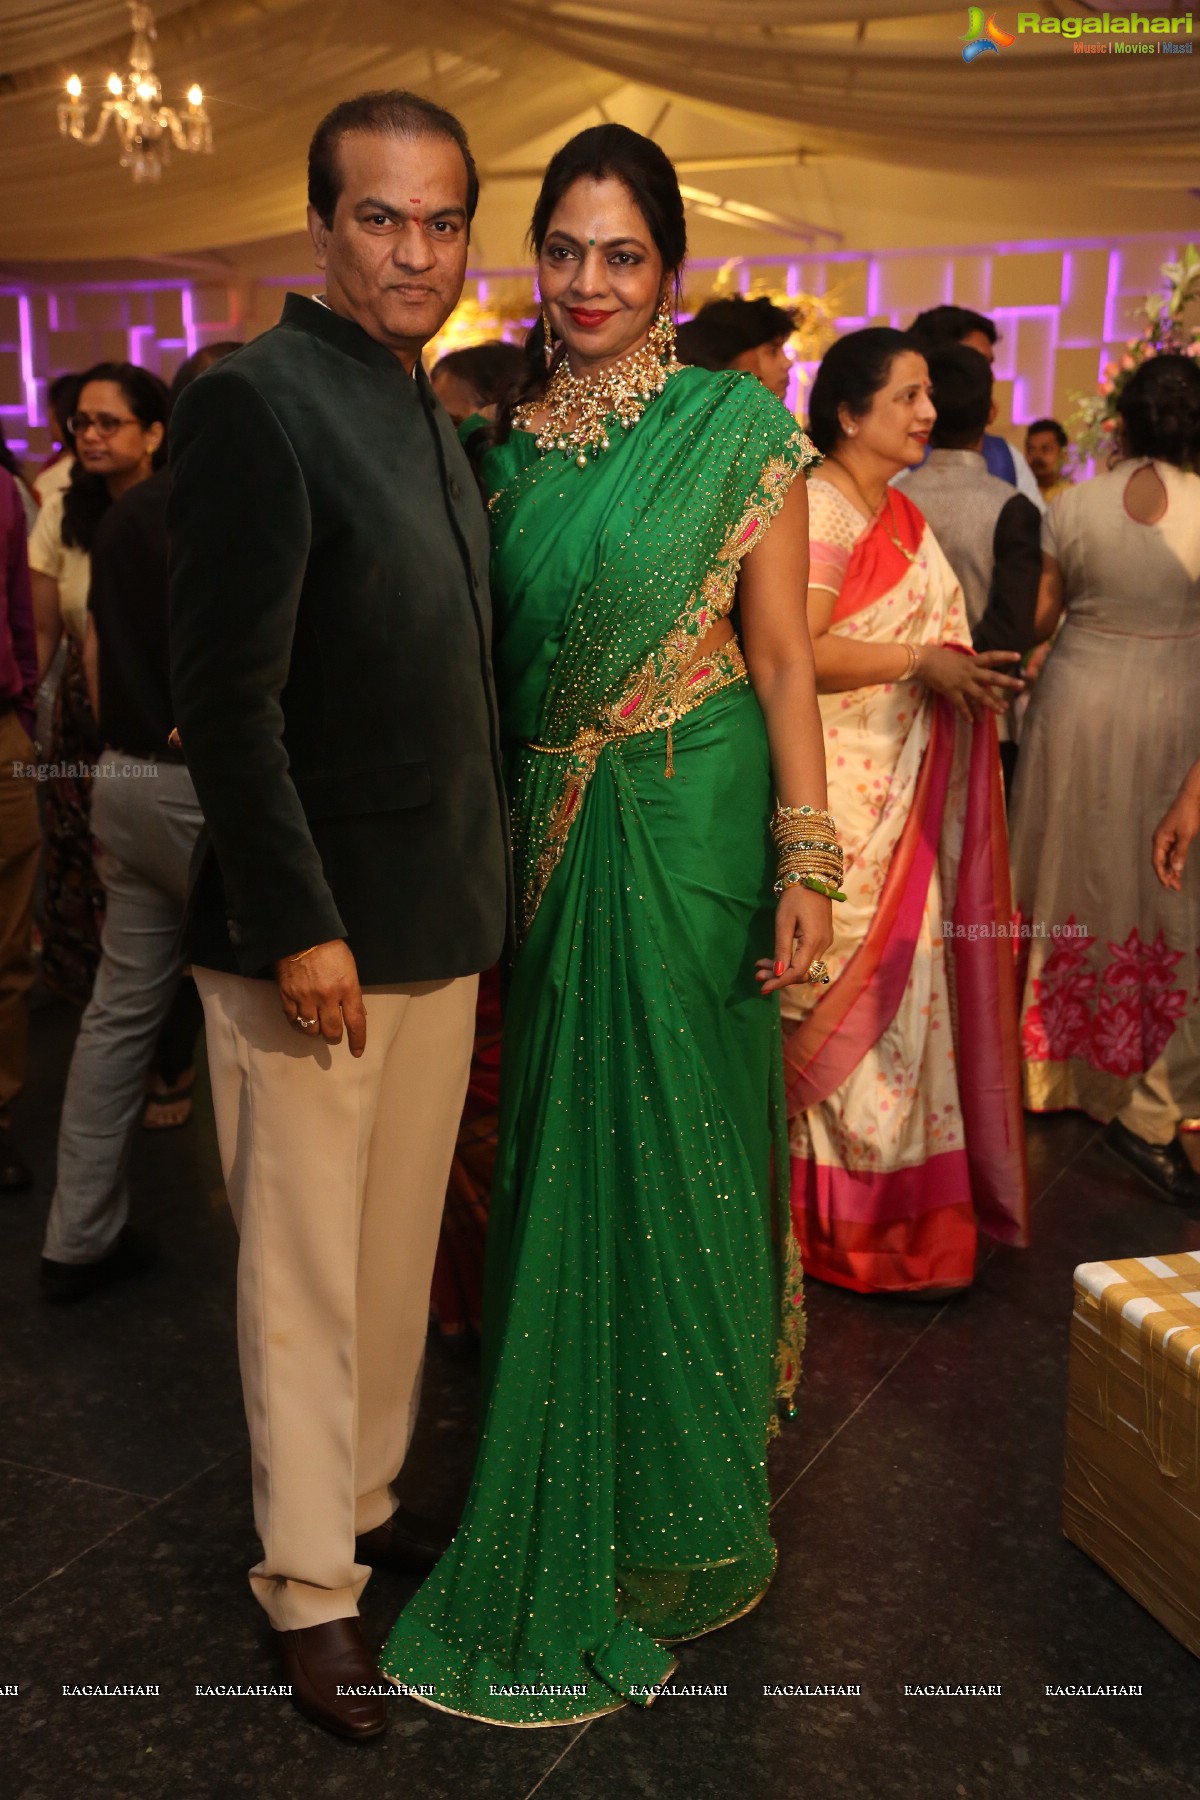 Grand Engagement and Sangeet Ceremony of Vijay Karan with Aashna at N Convention, Madhapur, Hyderabad